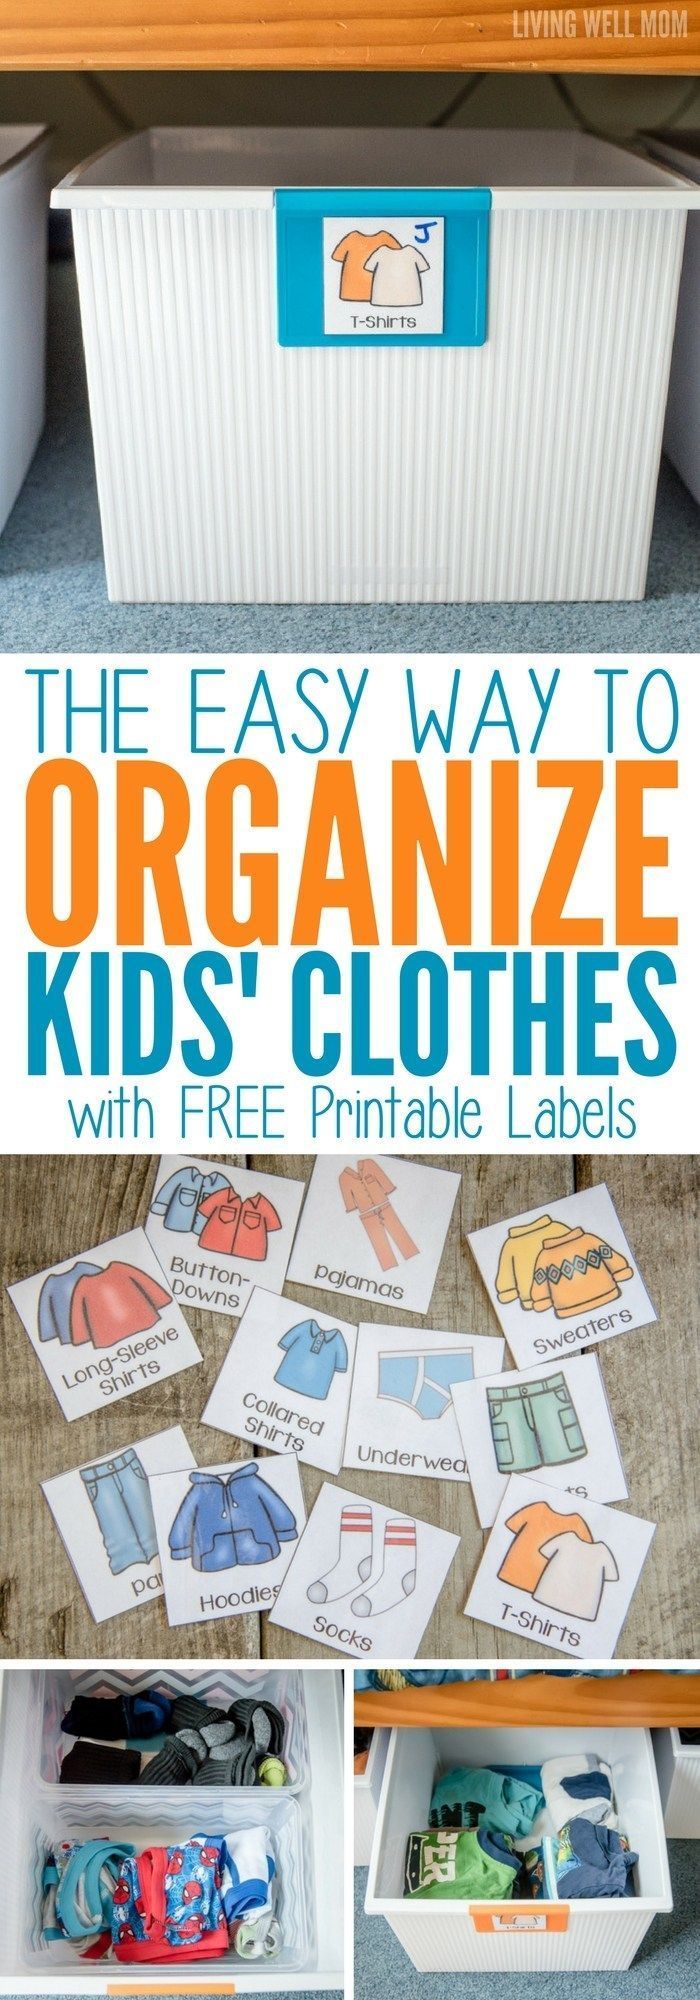 The Easy Way to Organize Kids' Clothes -   12 DIY Clothes Storage how to organize ideas